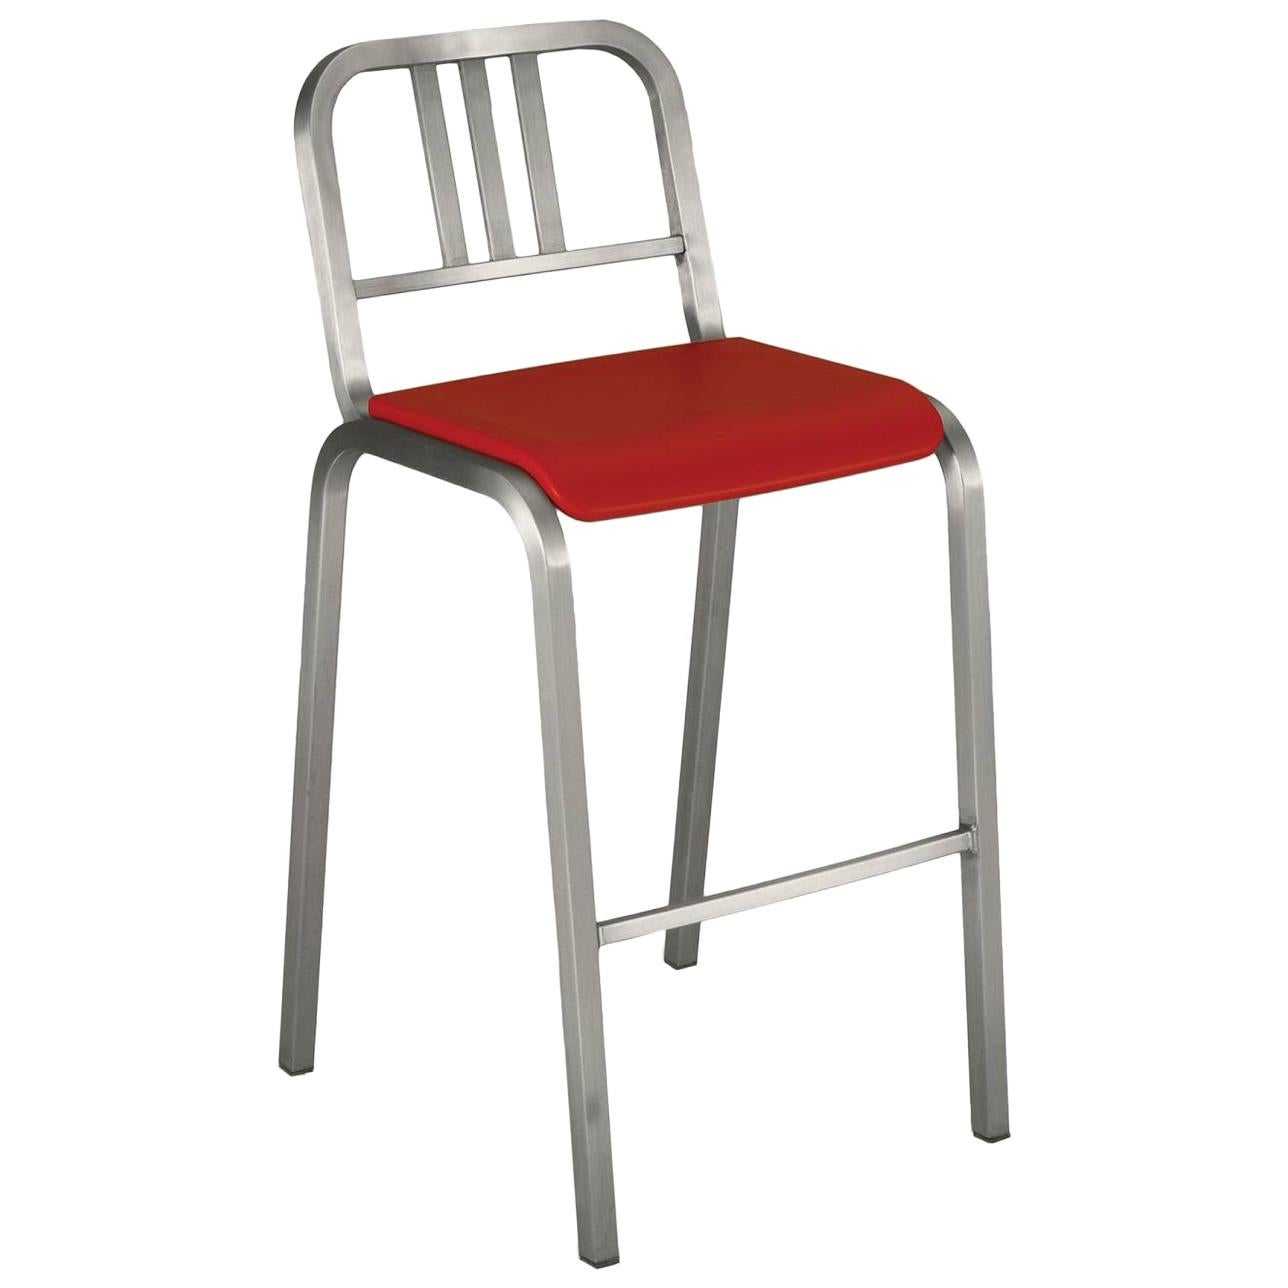 Emeco Nine-0™ Barstool in Brushed Aluminum w/ Red Seat by Ettore Sottsass